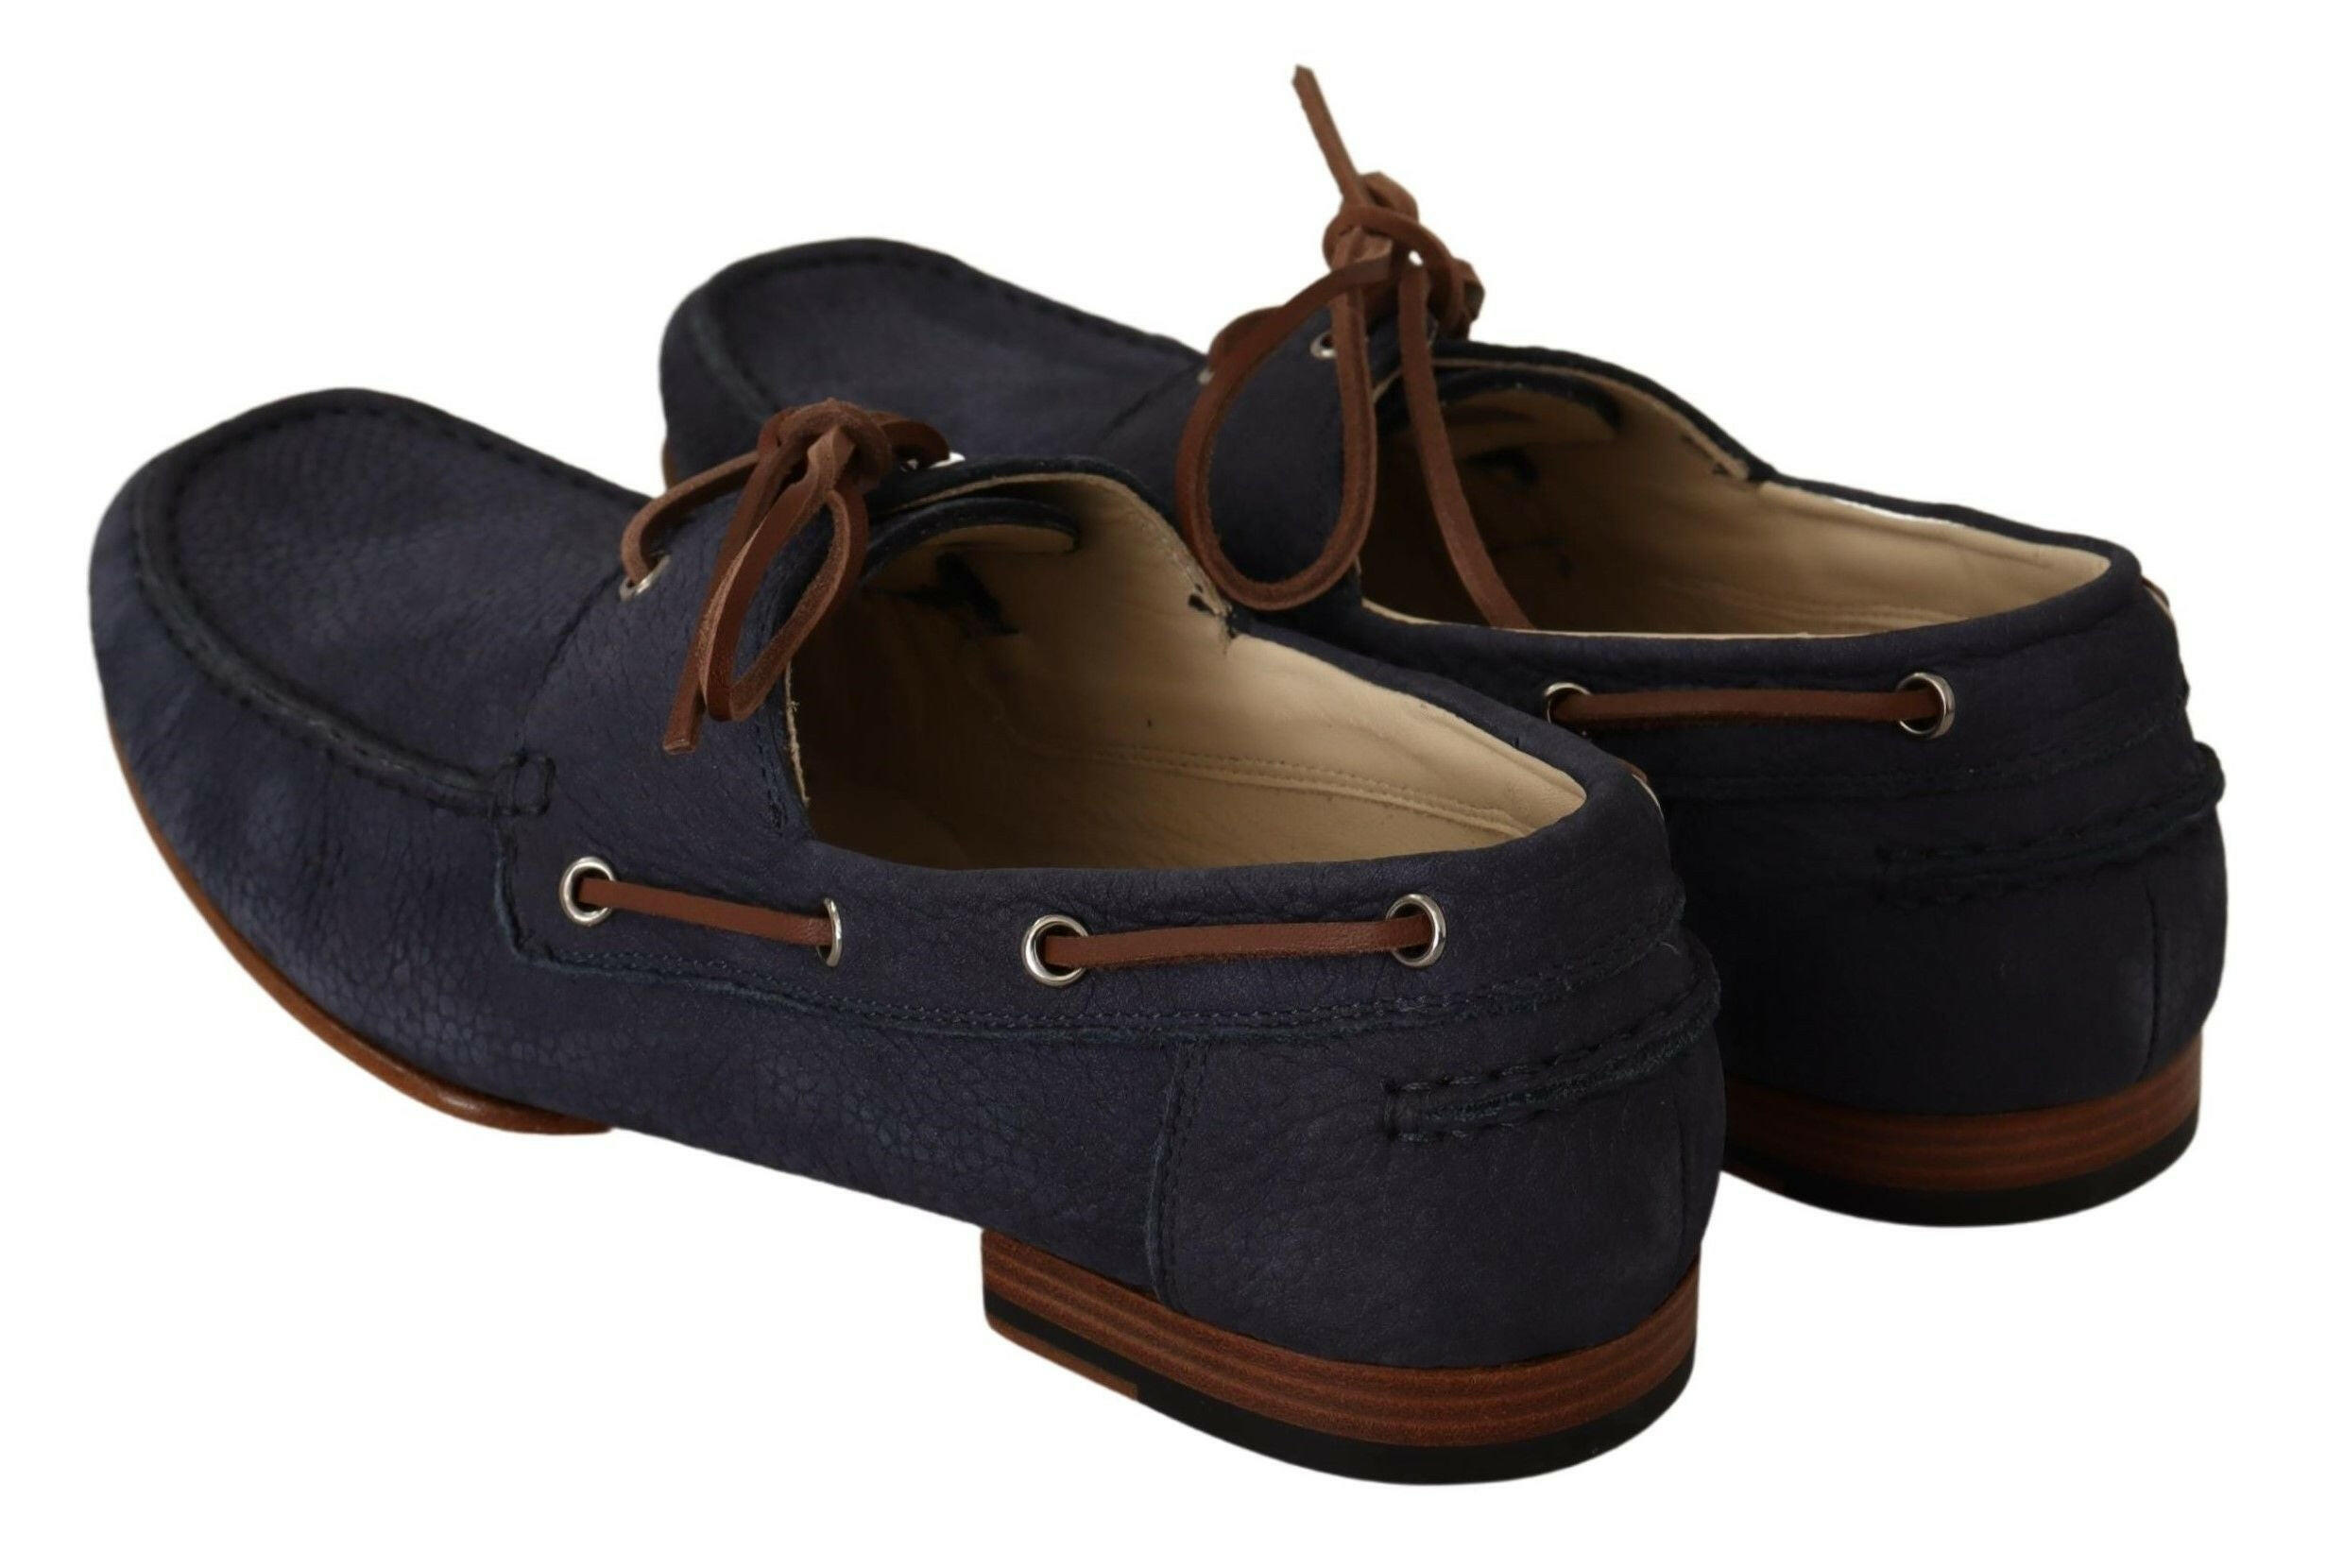 Dolce & Gabbana Blue Leather Lace Up Men Casual Boat Shoes - GENUINE AUTHENTIC BRAND LLC  